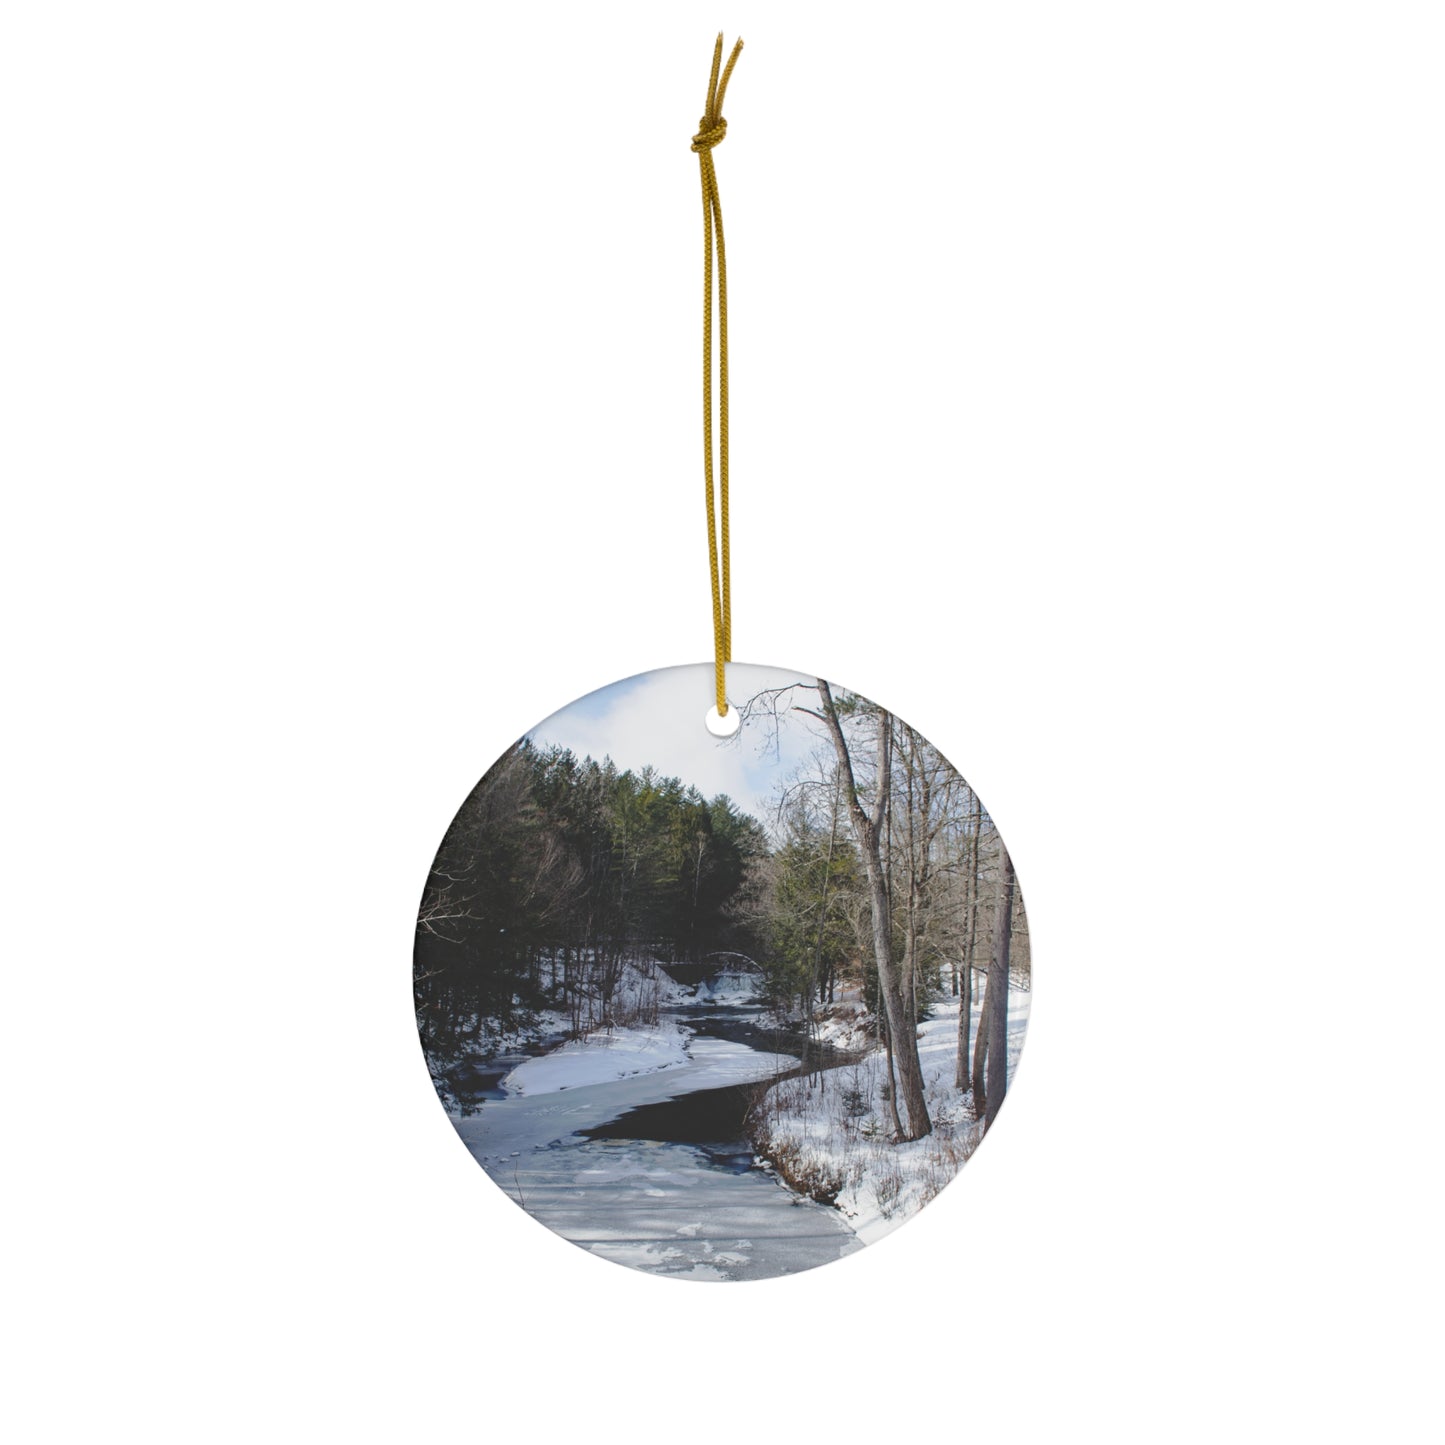 Vermont Christmas Ornament, Vermont Winter Scenic Ornament for Vermont Lovers, Vermont Ornaments Make Great Decorations